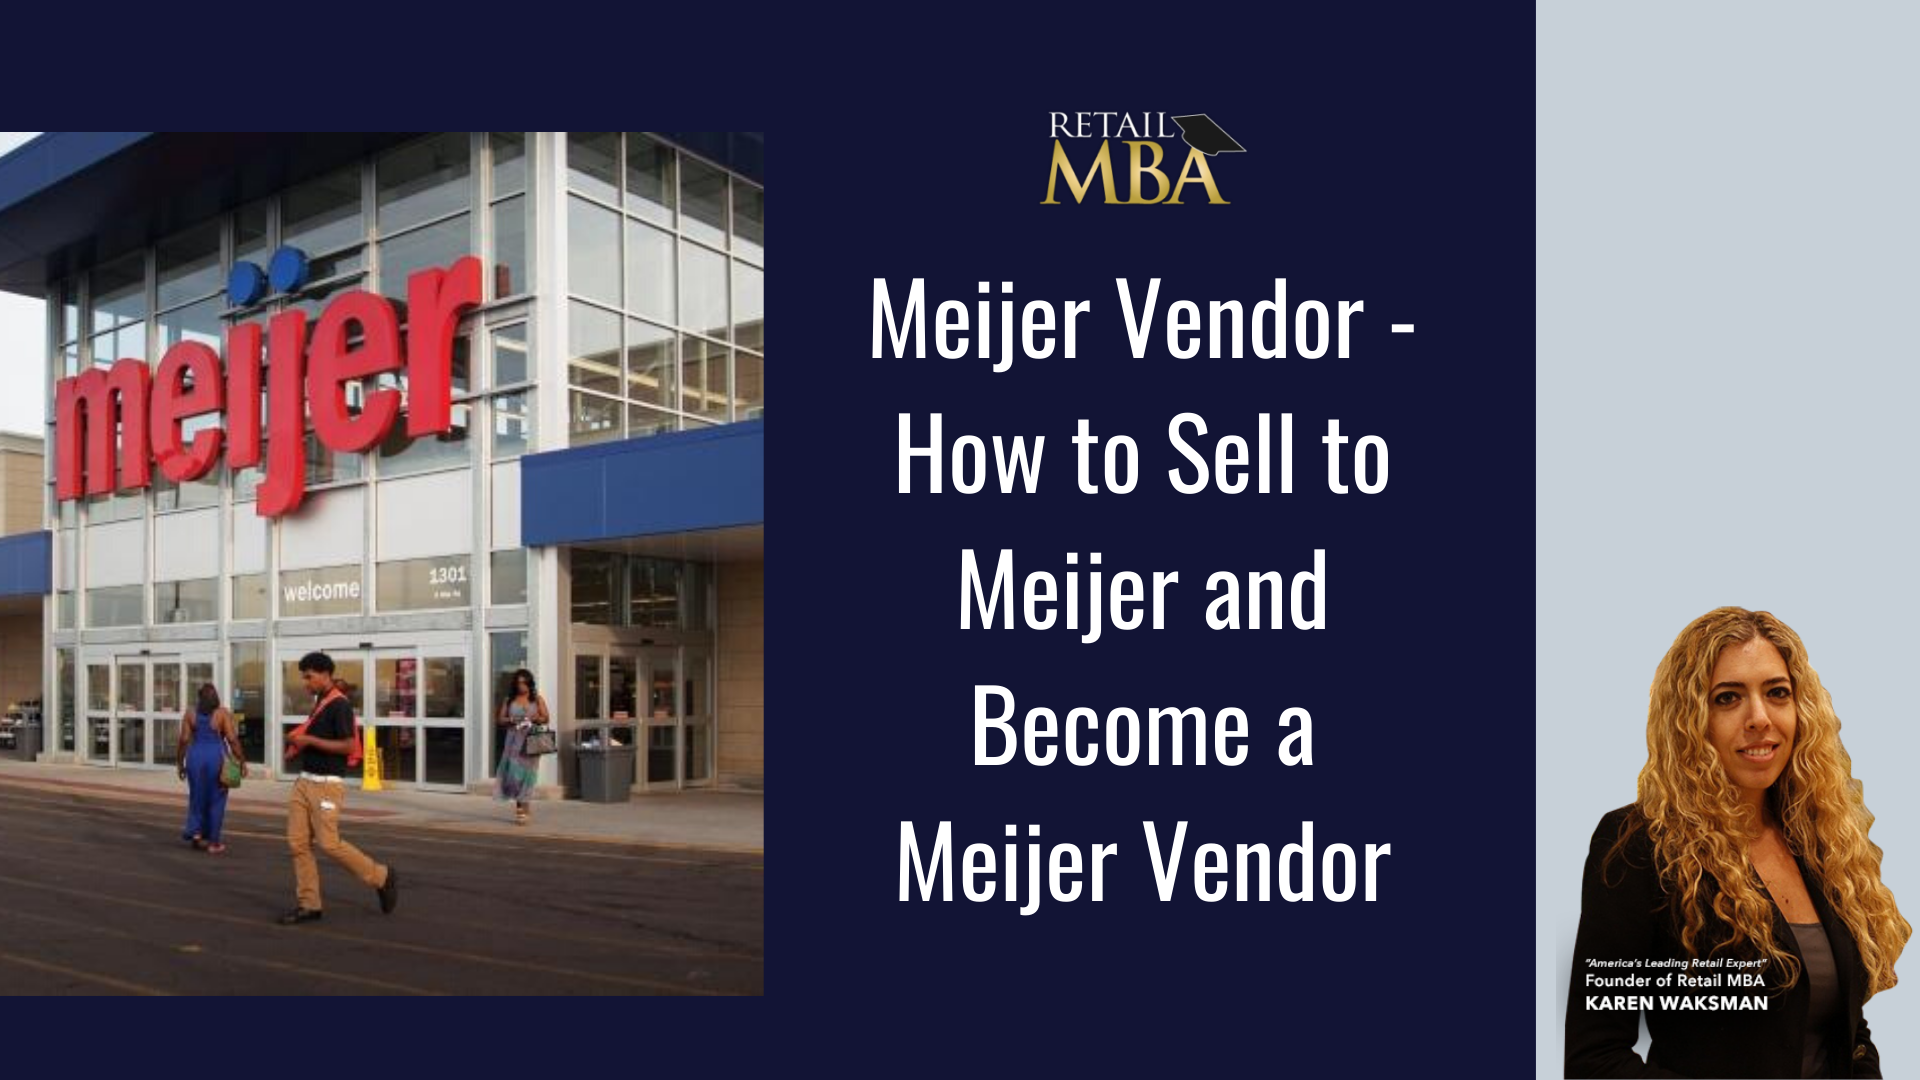 Meijer Vendor - How to Sell to Meijer and Become a Meijer Vendor